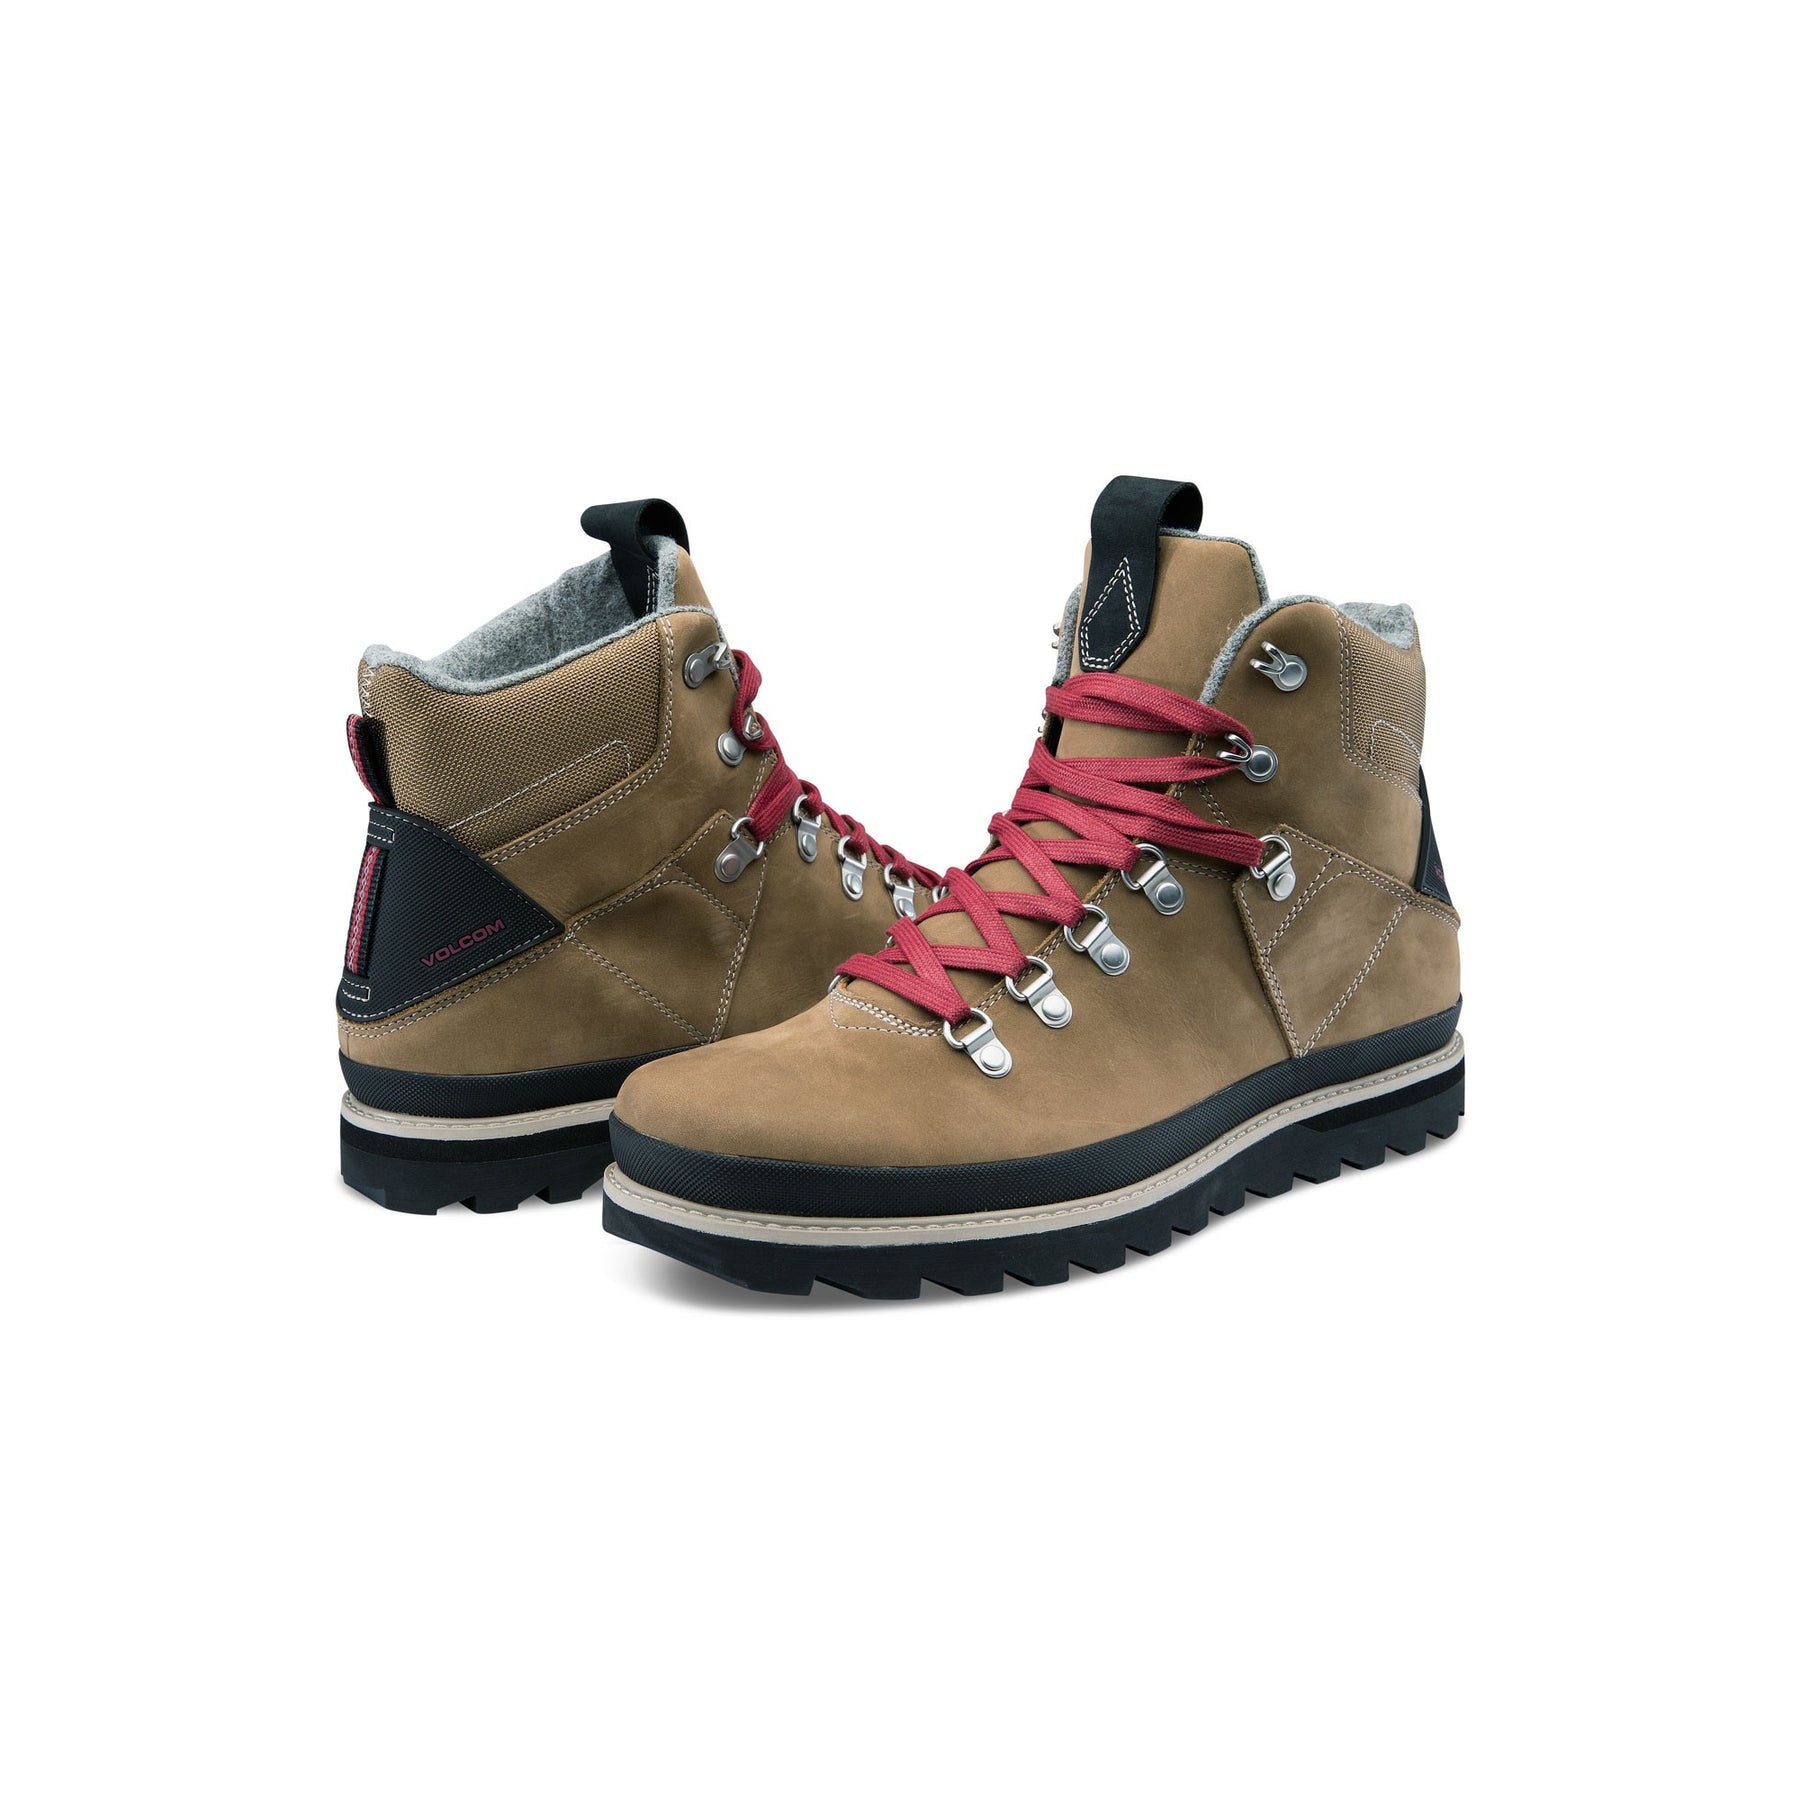 Buy discounted volcom boots at 88 Gear